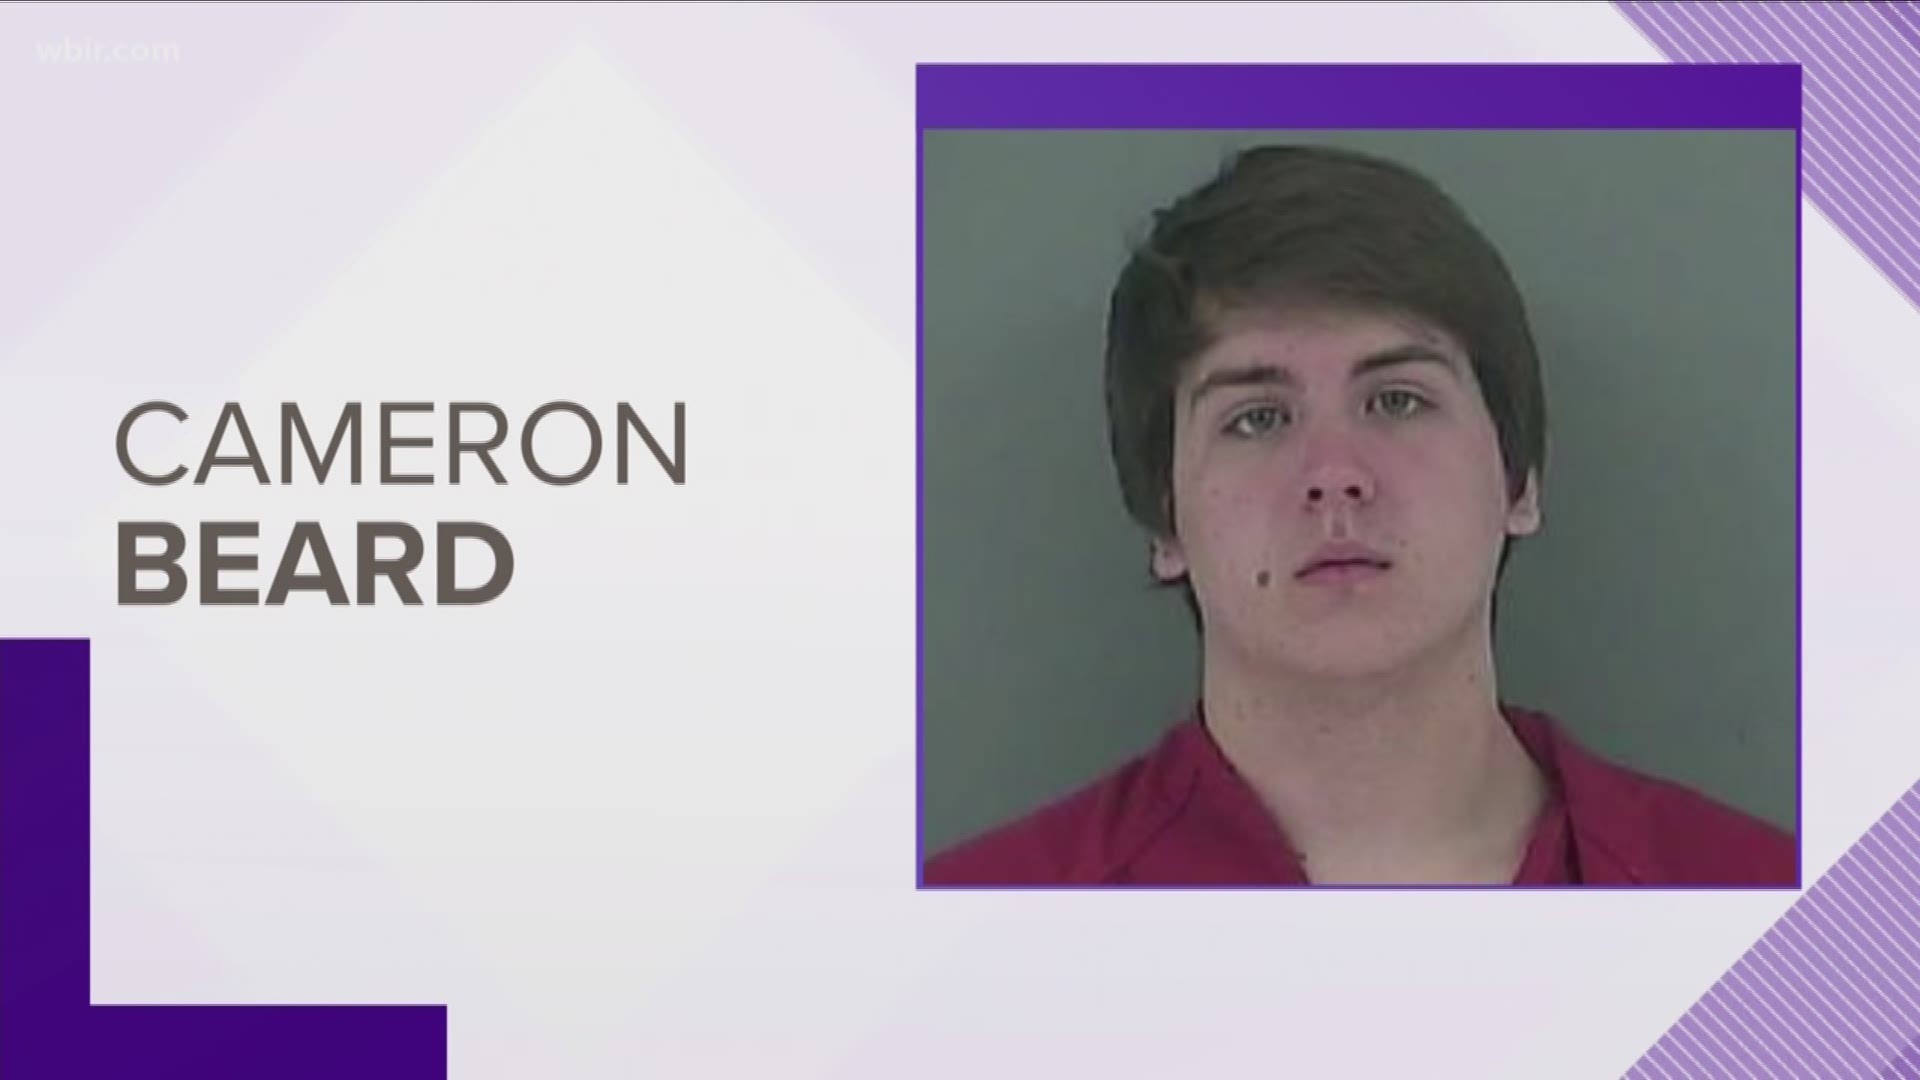 Officers said an infant had been found unresponsive in March and treated a brain injury. In October, a grand jury indicted 20-year-old Cameron Beard on multiple charges of child abuse in the incident